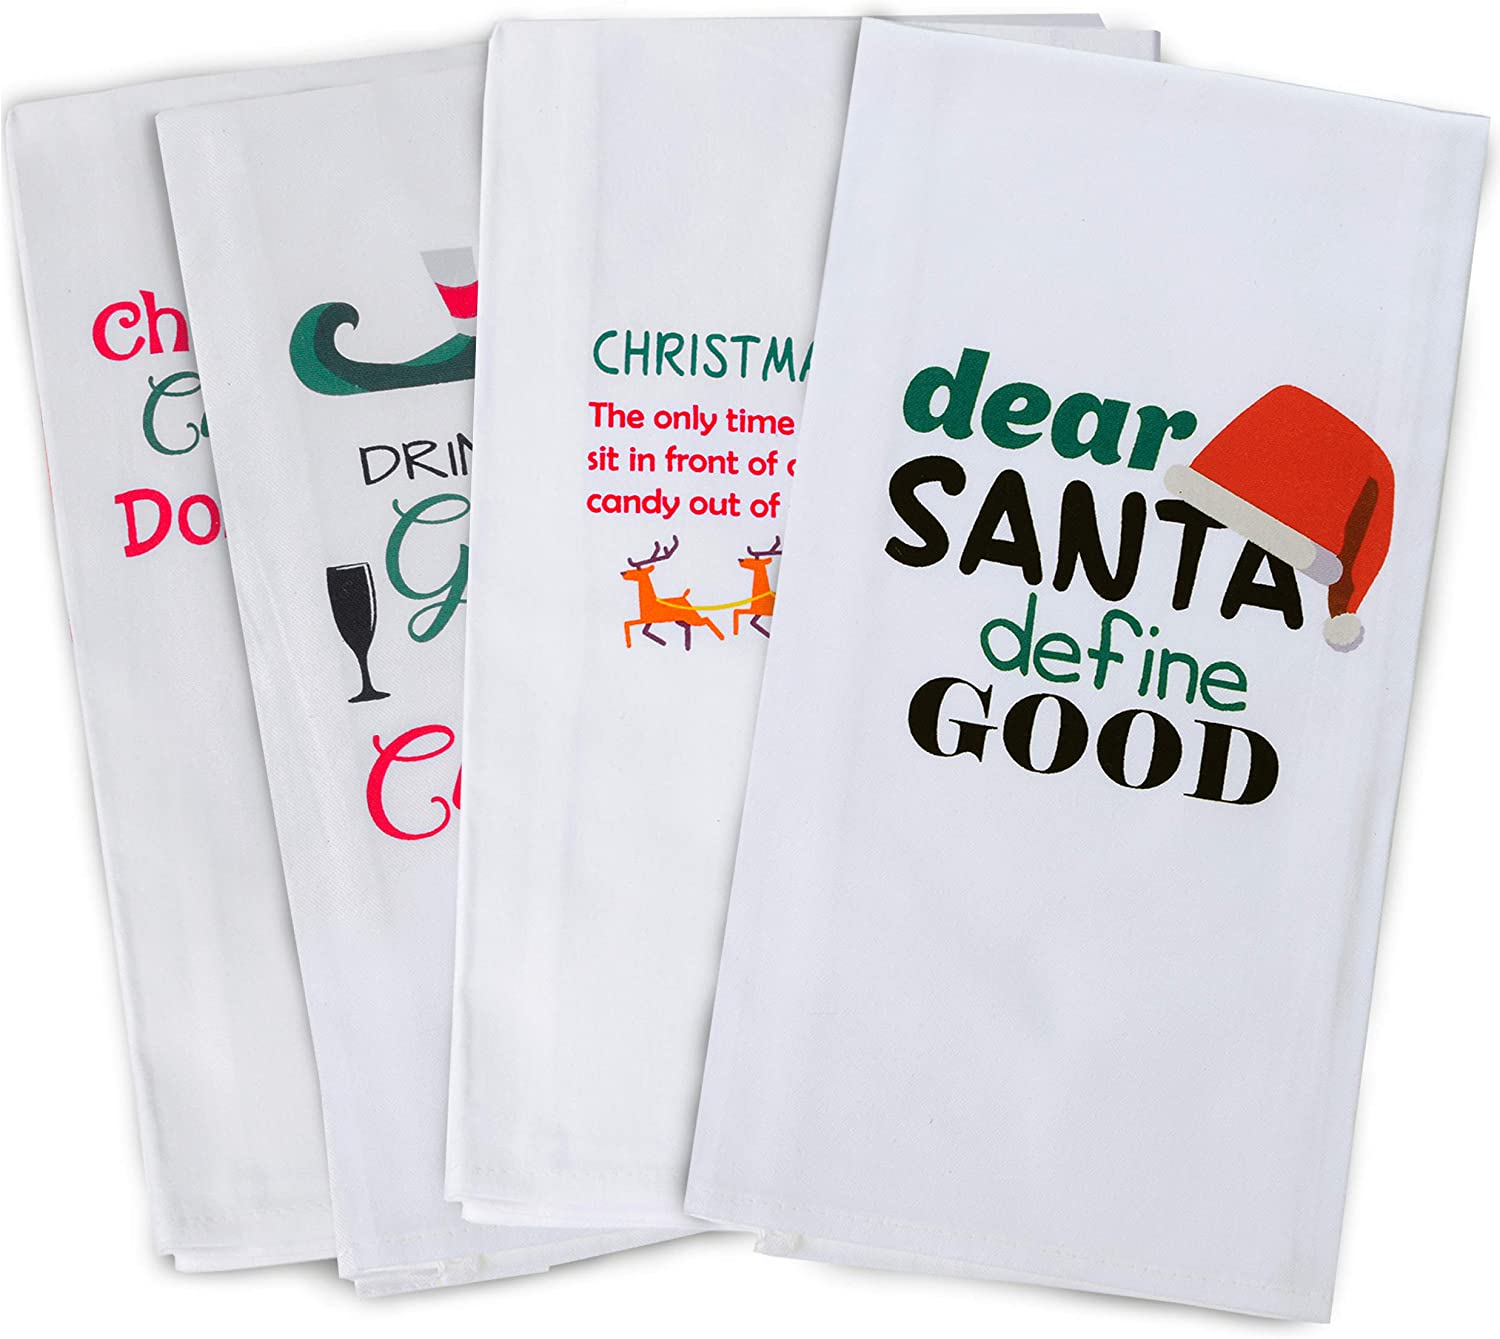 Funny Sayings kitchen cotton tea towel Christmas gift, flour sack, hostess  gift, housewarming gift, just beat it, gift under 10, chef gift by Blue  Mountain Bags